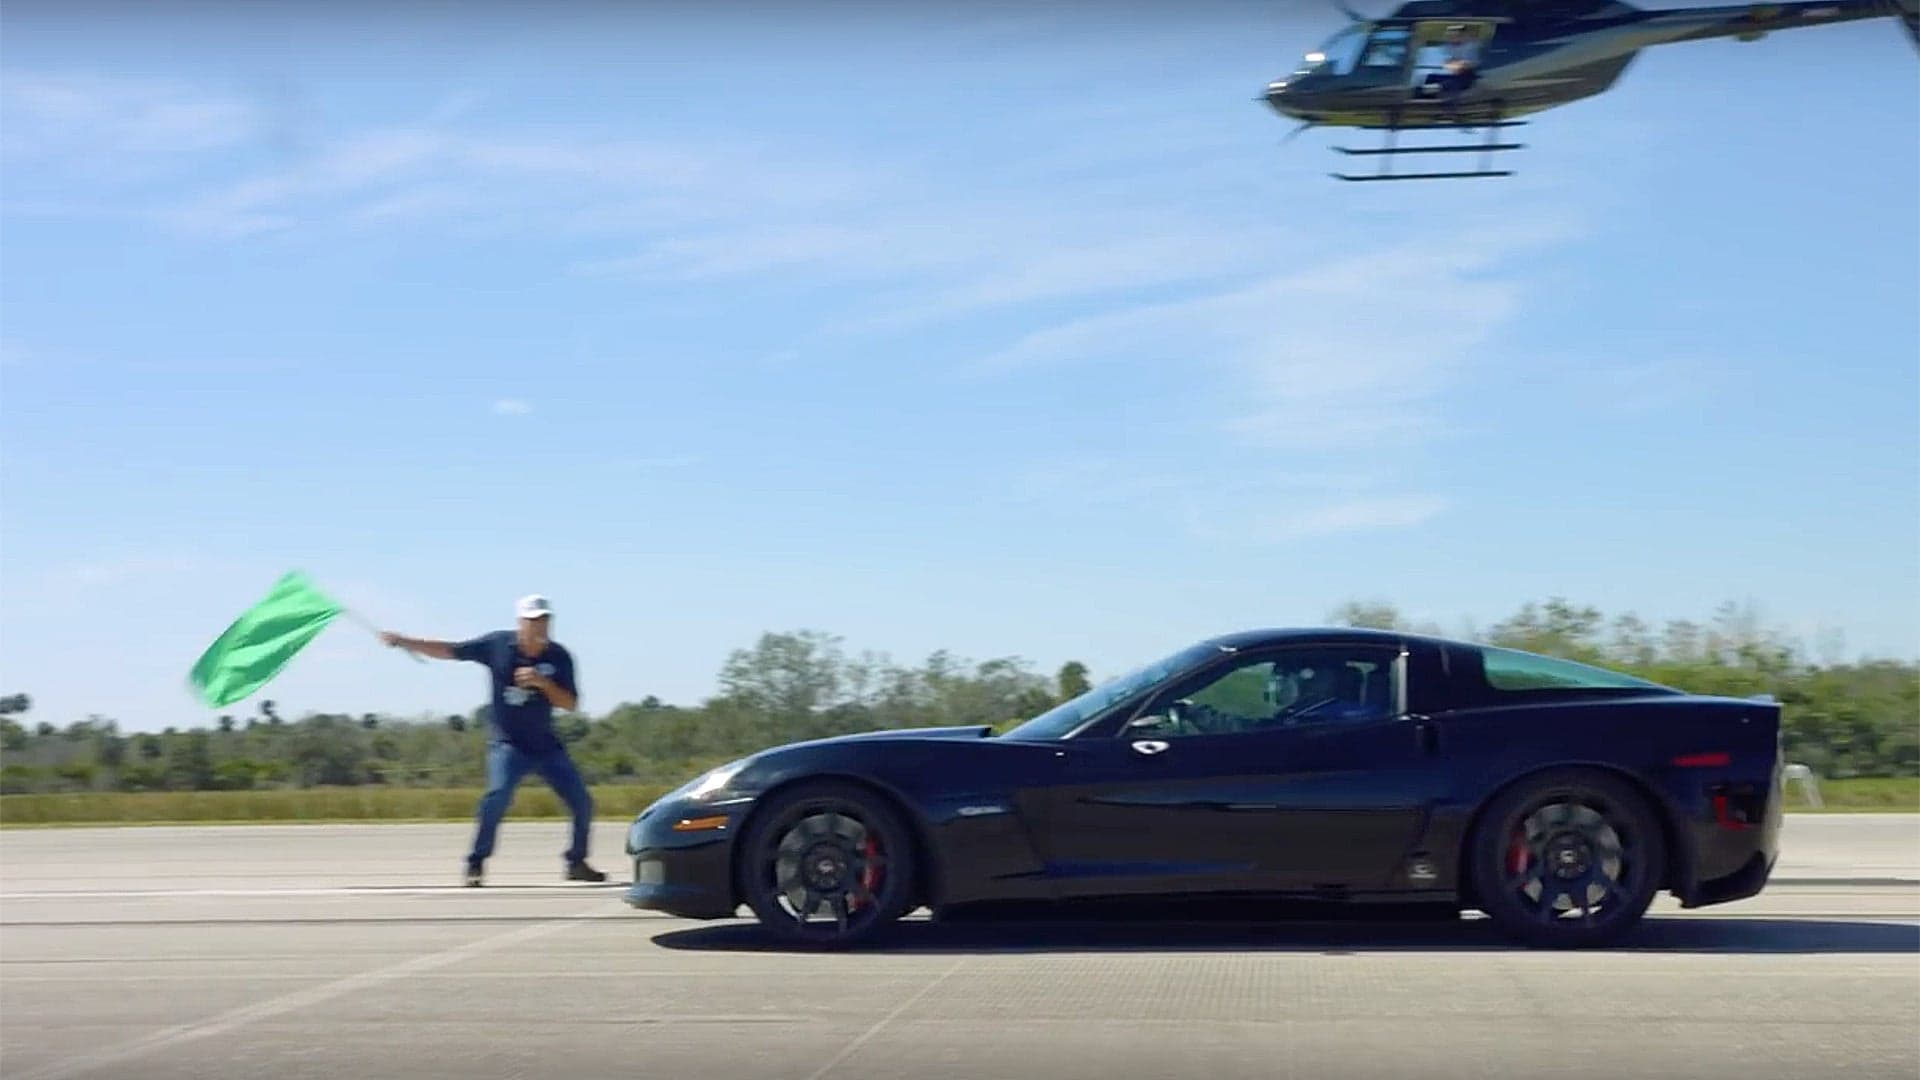 Watch This 700-HP Electric Chevy Corvette Blast from 0 to 190 MPH in One Mile